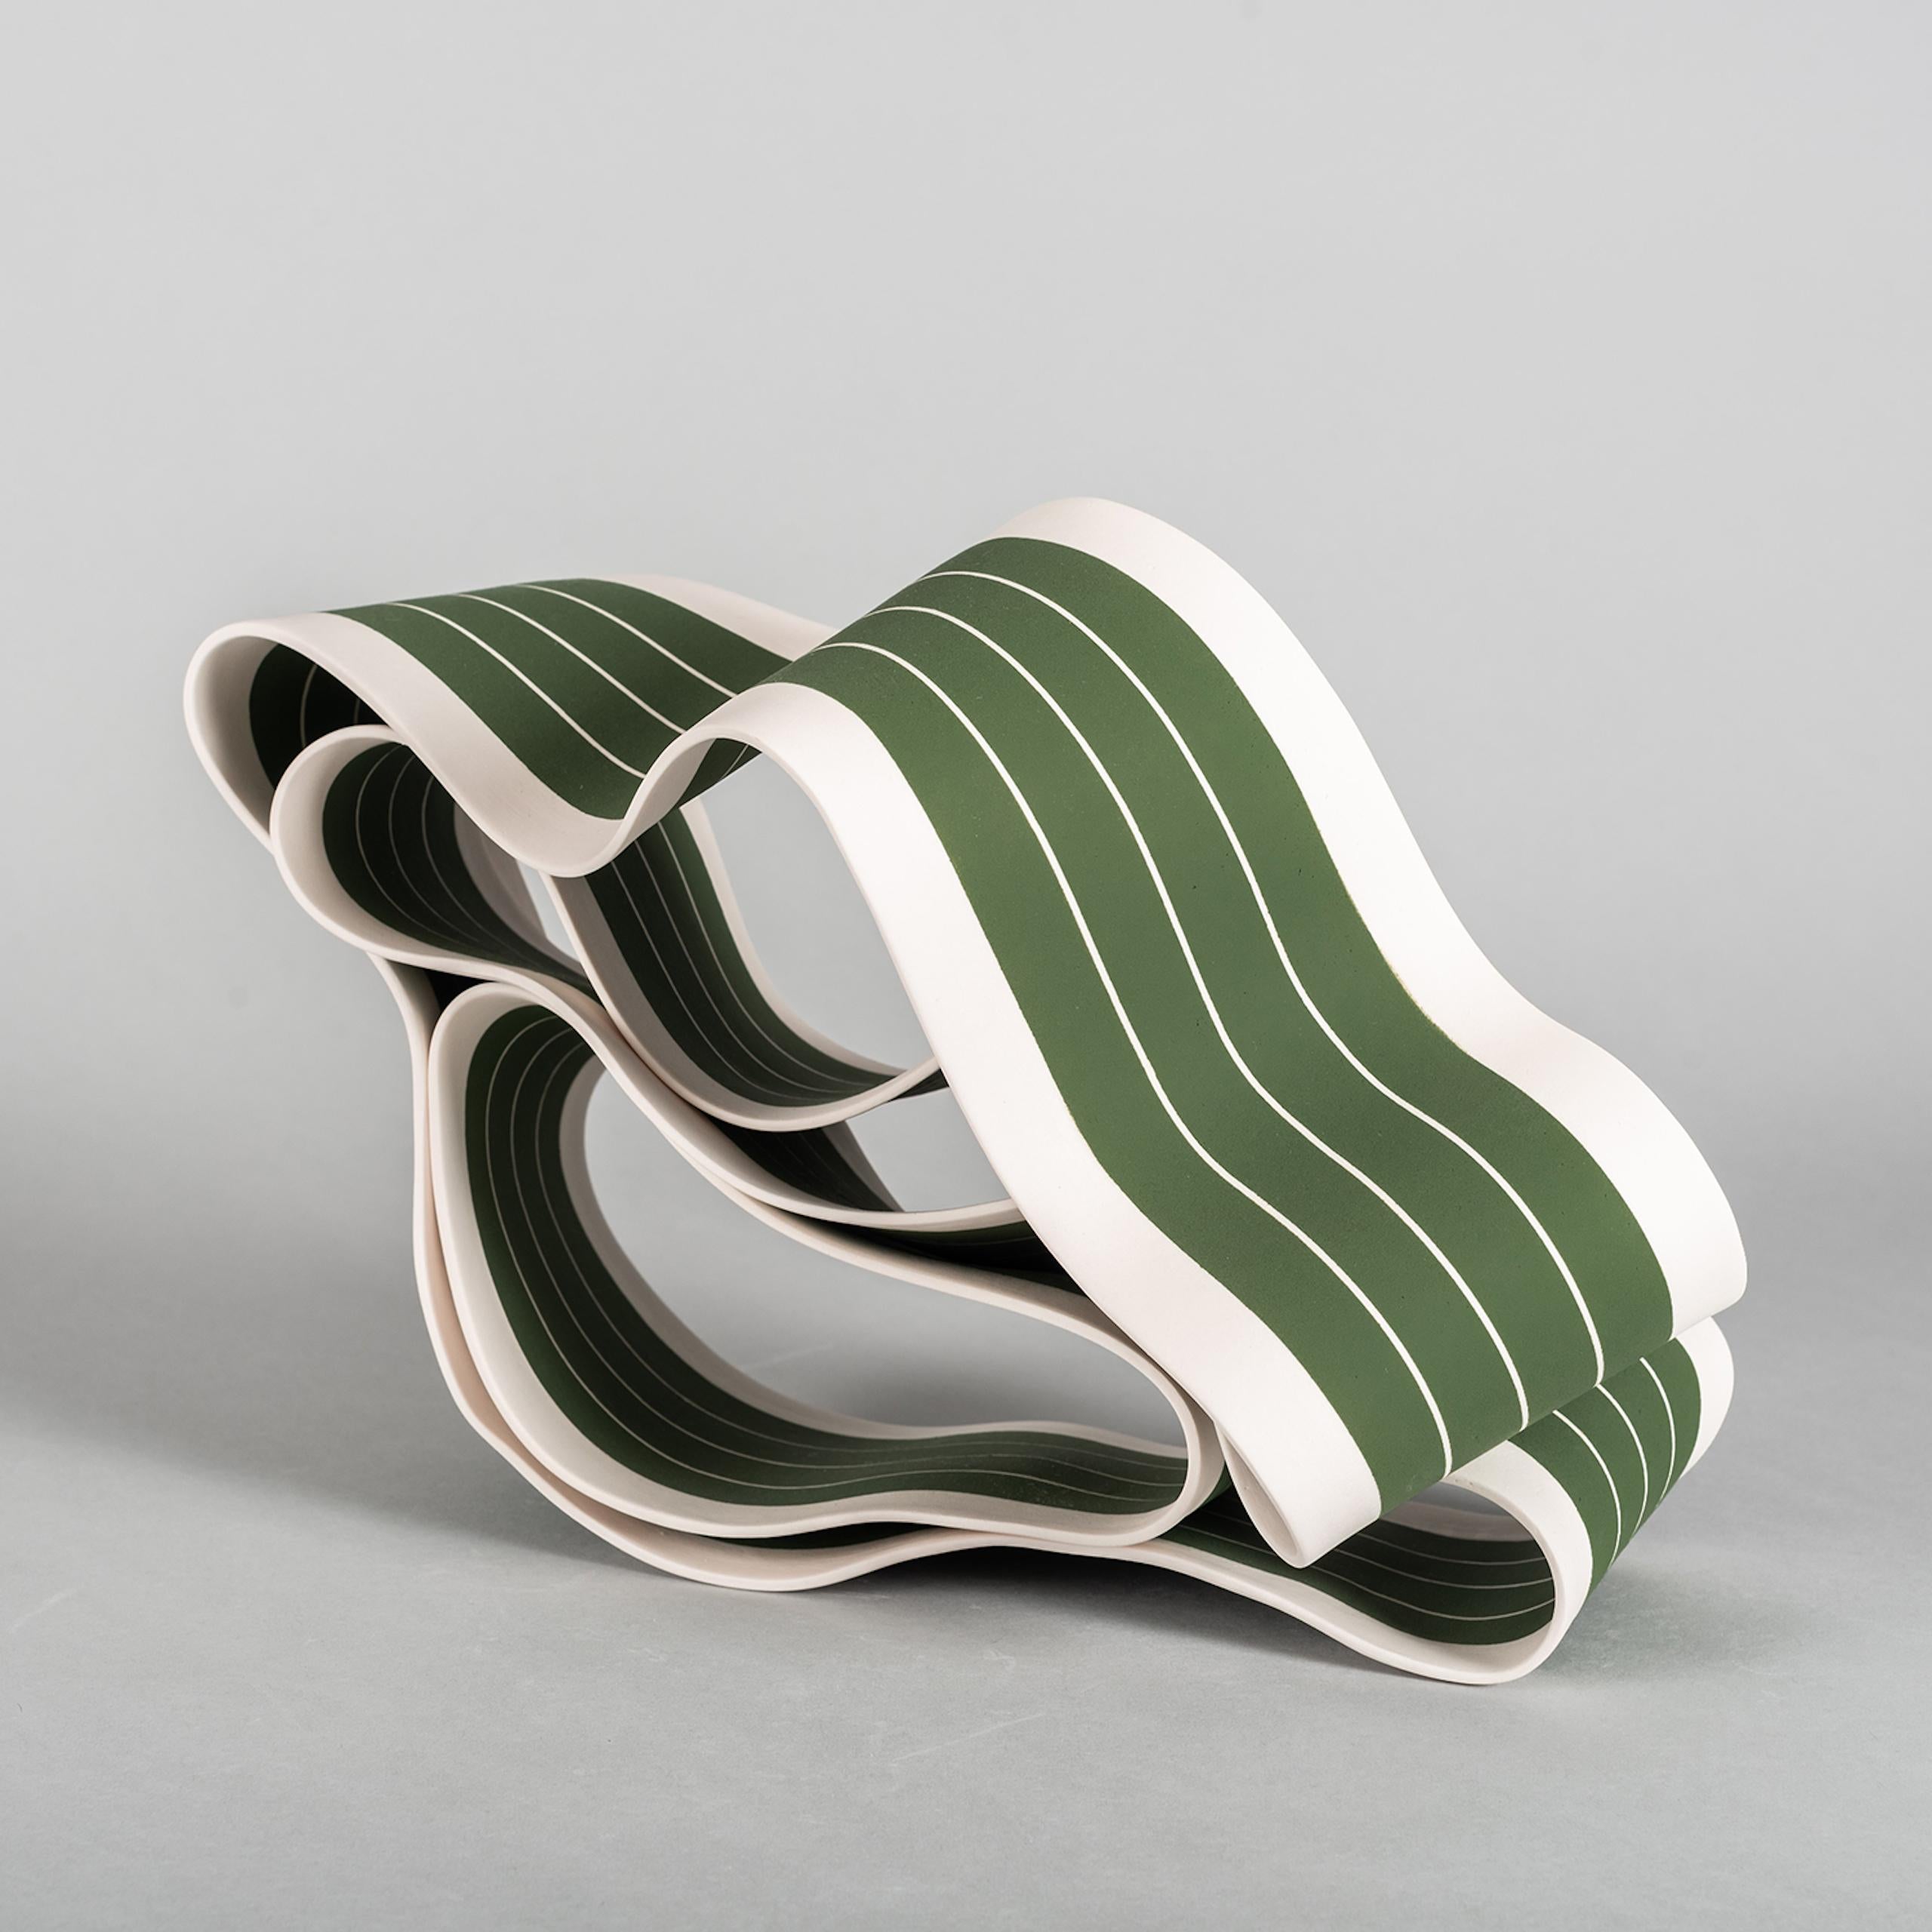 Folding in Motion 4 by Simcha Even-Chen - Porcelain sculpture, green lines For Sale 1